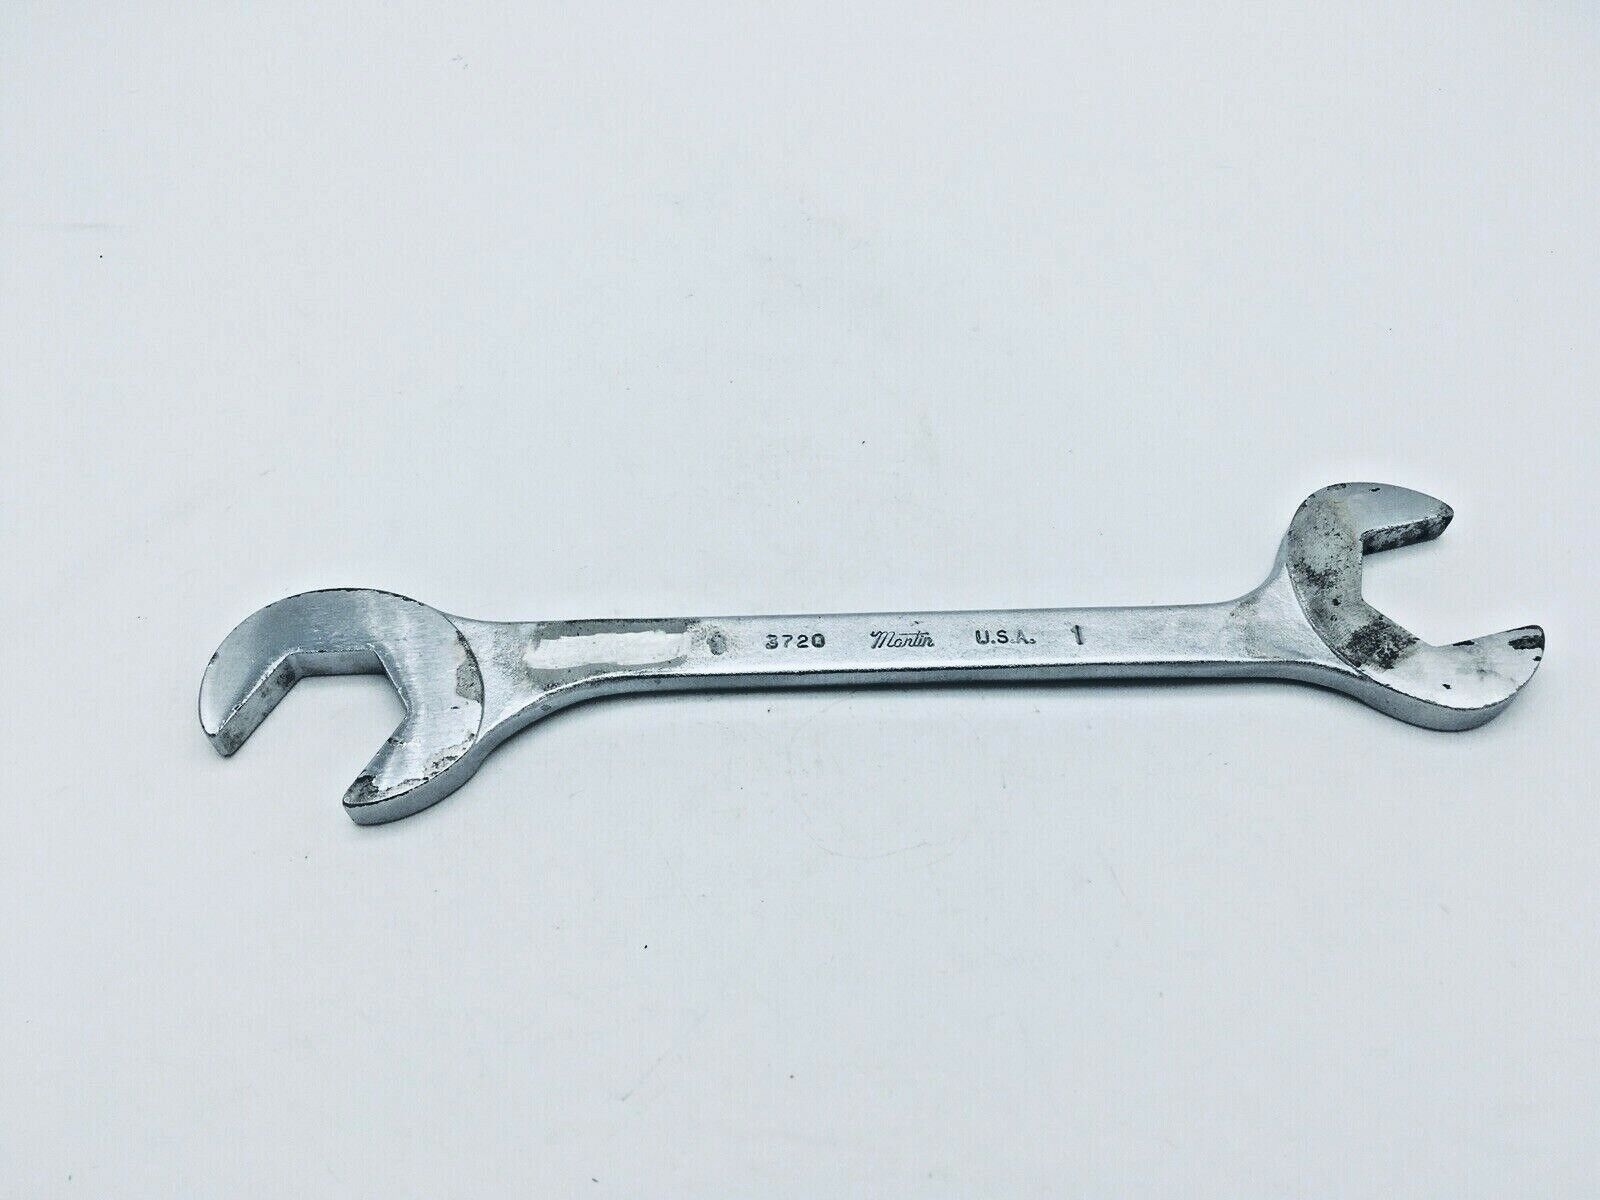 Martin Sprocket 3720 1" Hex 60° Angled Head Chrome Double Open End Wrench USA